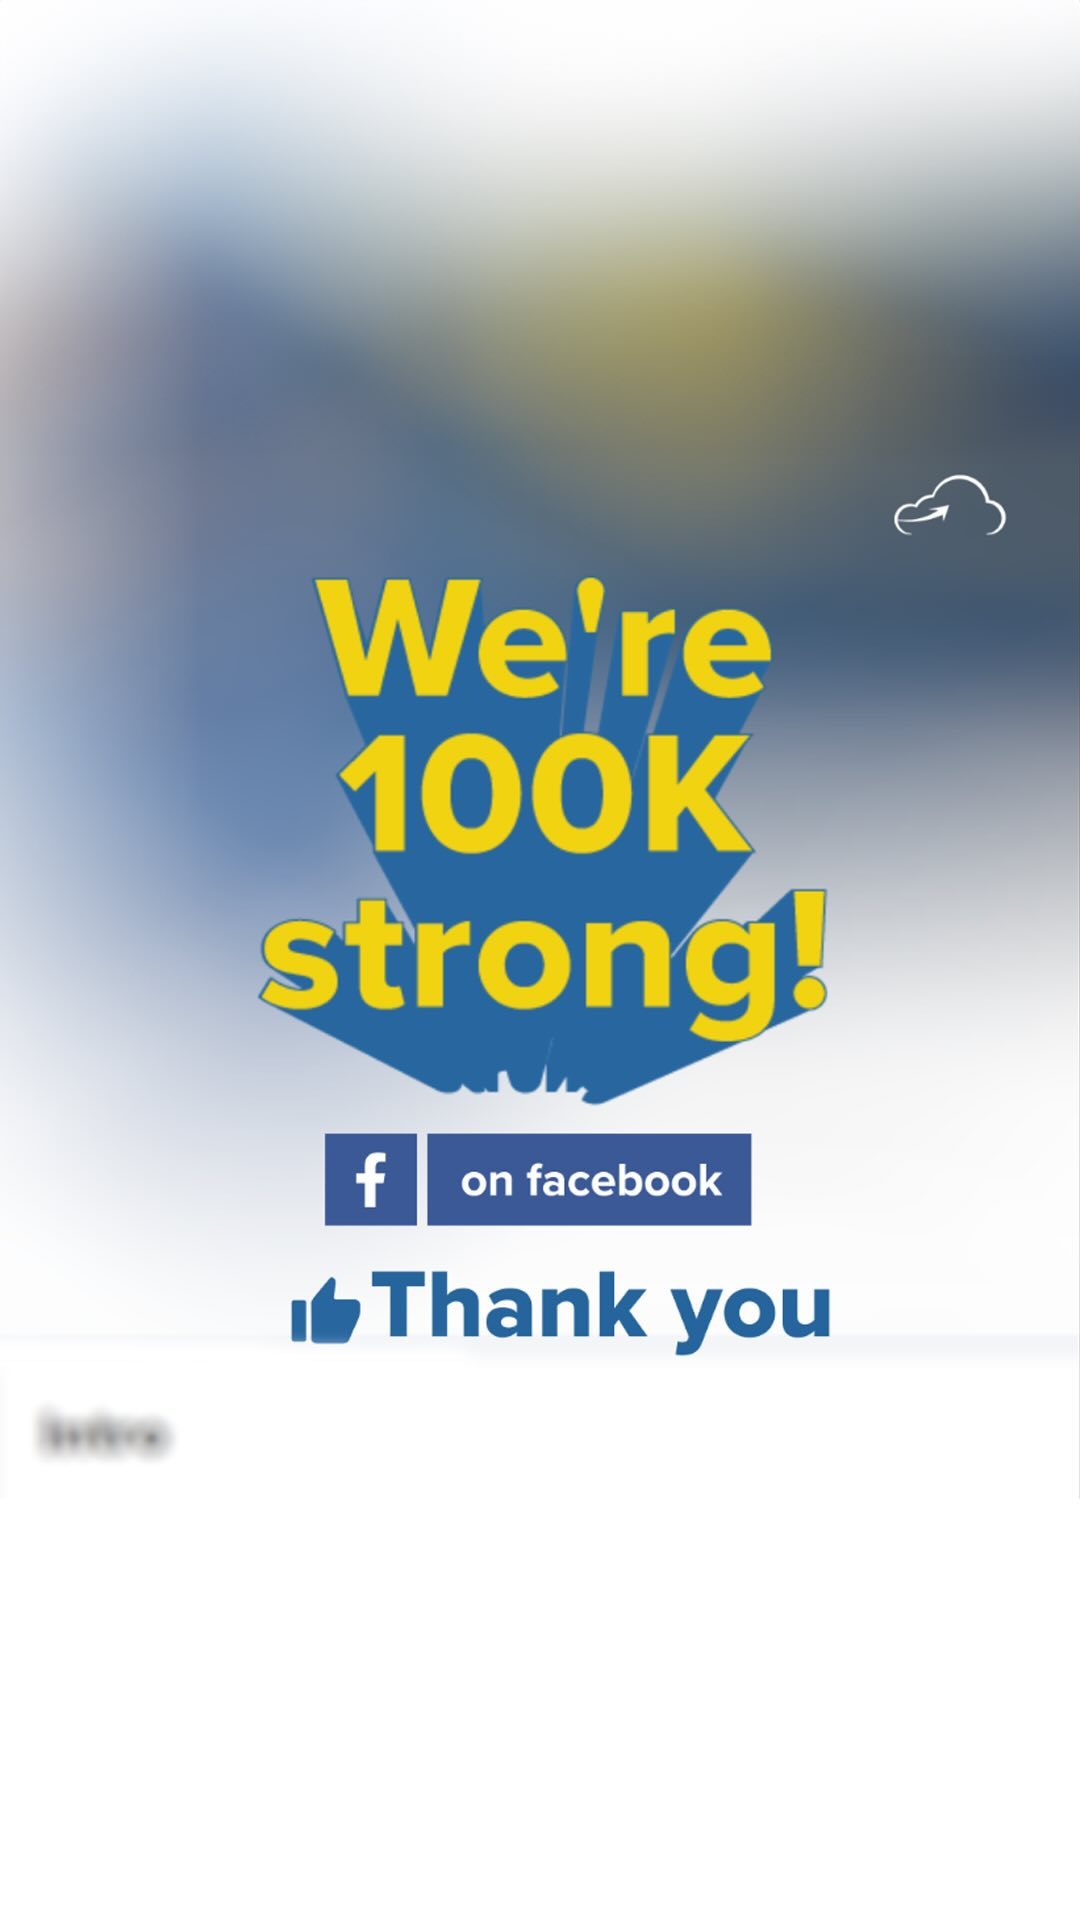 Your support and love have helped us soar higher! We are elated to have reached a new milestone with our 100k family on Facebook. Thank You!
 
#100KStrong #MilestoneAchievement #ThankYouFollowers #Grateful #CommunityLove #FacebookFamily #Supporters #SocialMediaMilestone #CelebrationTime #TogetherWeAchieve #AppreciationPost #GrowingTogether #CommunitySupport #AchievementUnlocked #FacebookSuccess #100KFollowers  #TeamWork